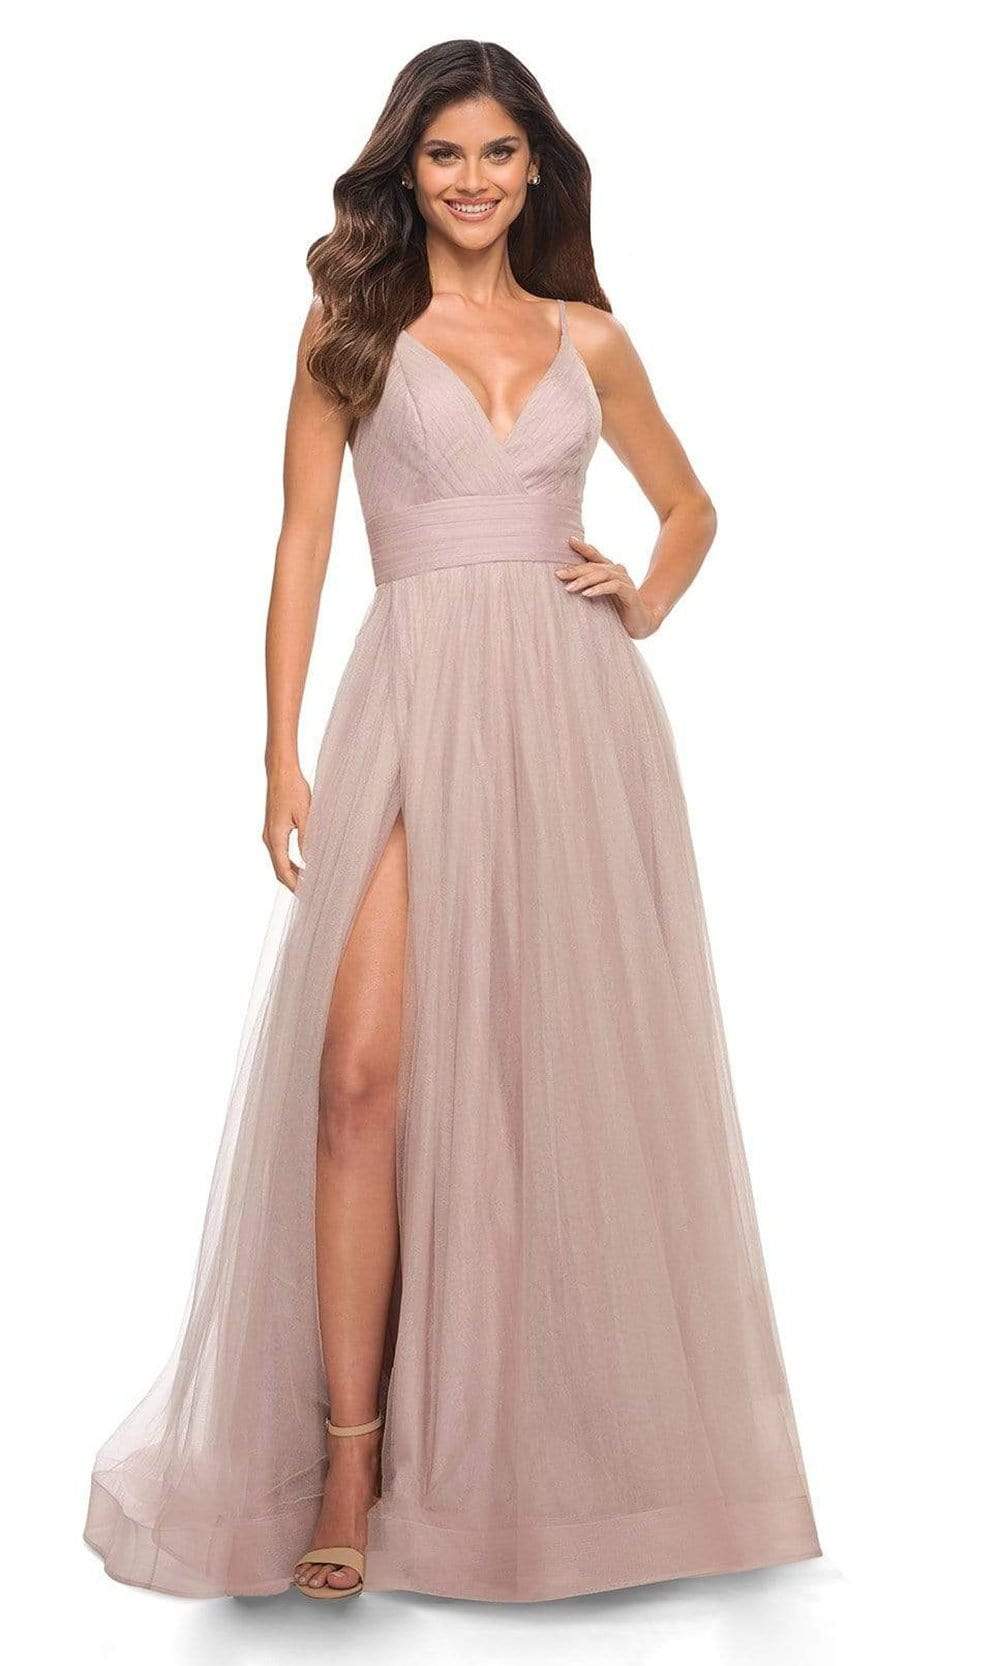 Image of La Femme - 30180 Spaghetti Strap Tulle A-Line Gown